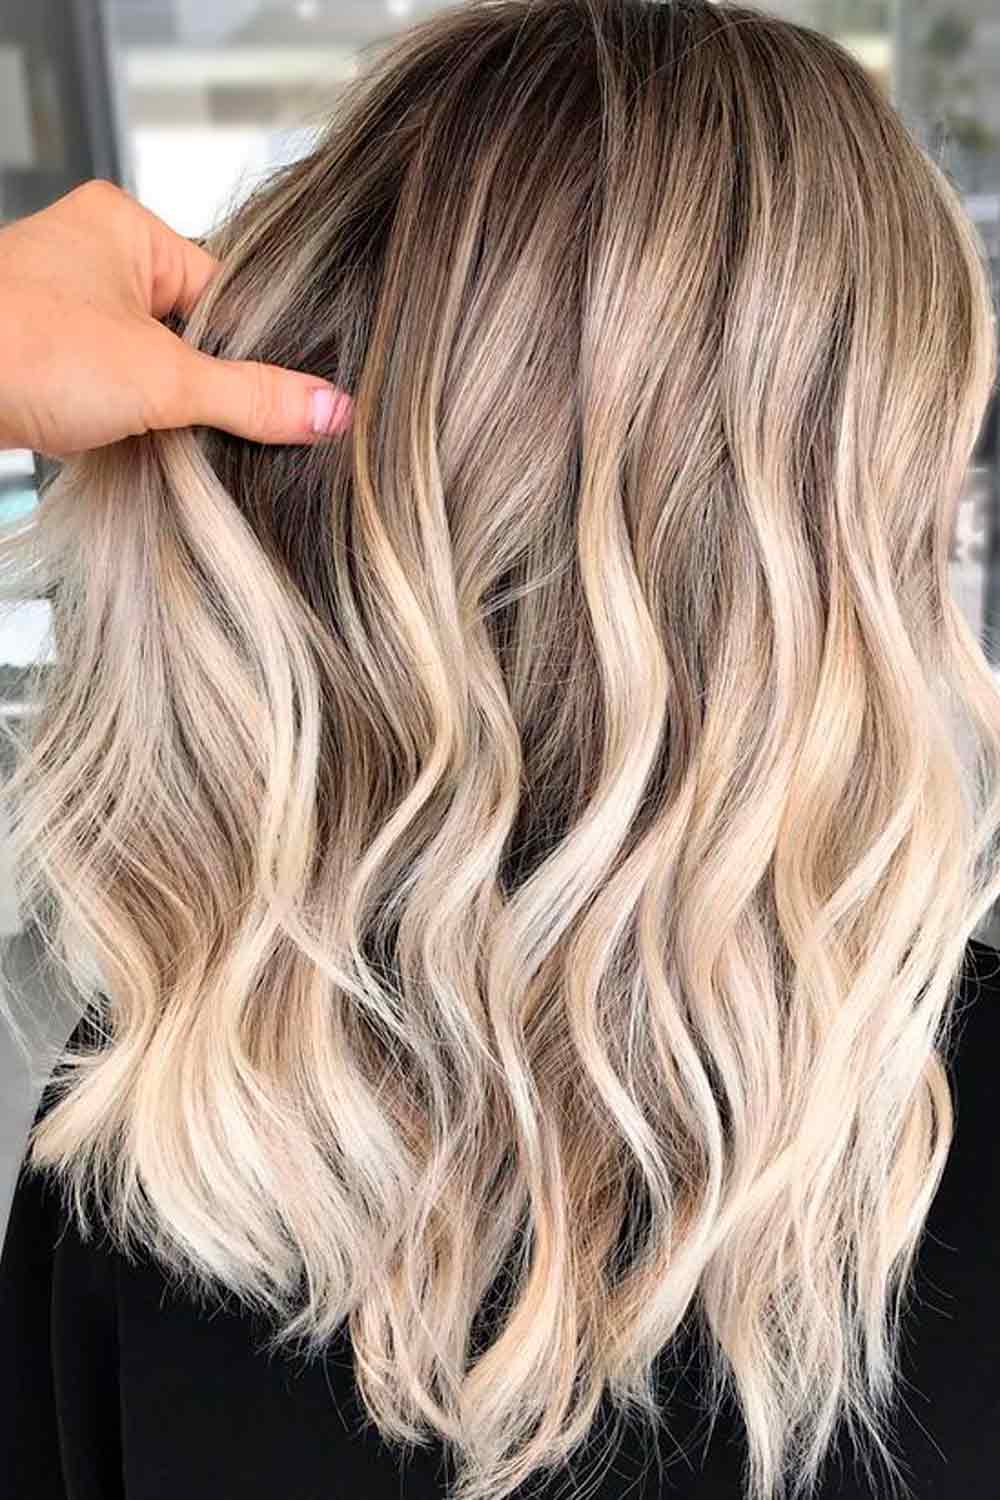 Tips To Help You Maintain Your Ash Blonde Color